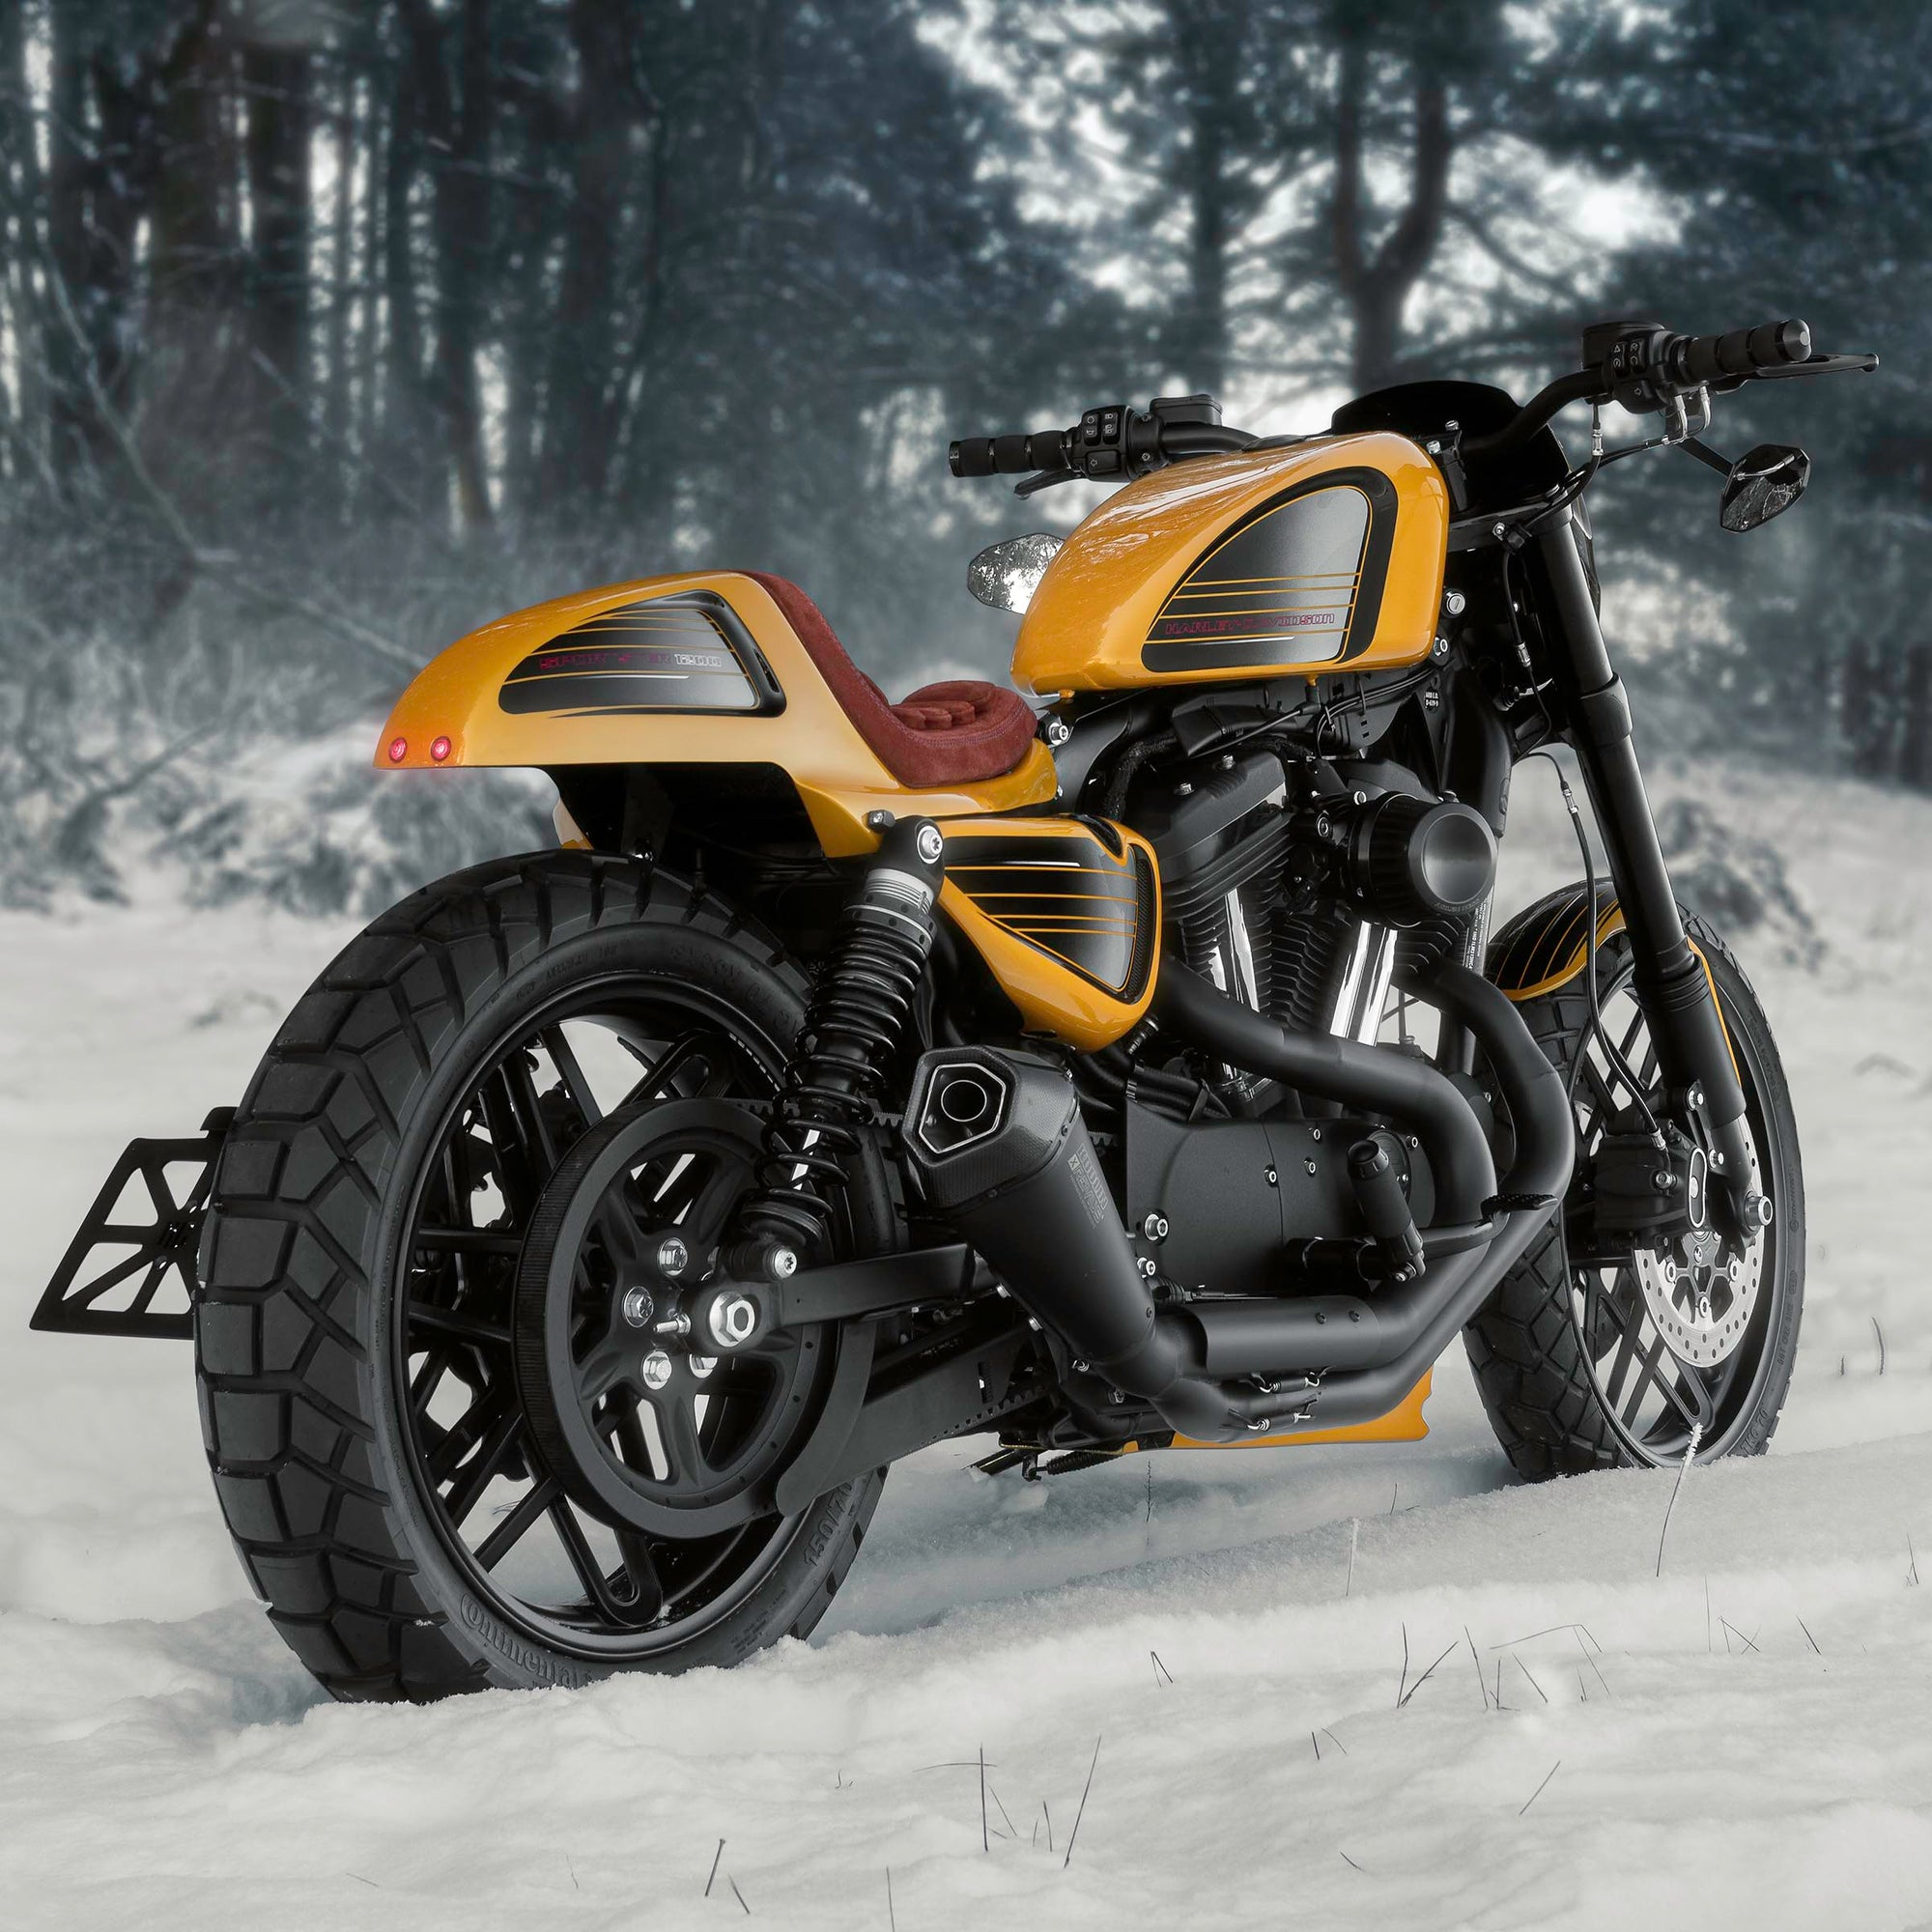 Harley Davidson motorcycle with Killer Custom parts from the rear with some snowy trees in the background